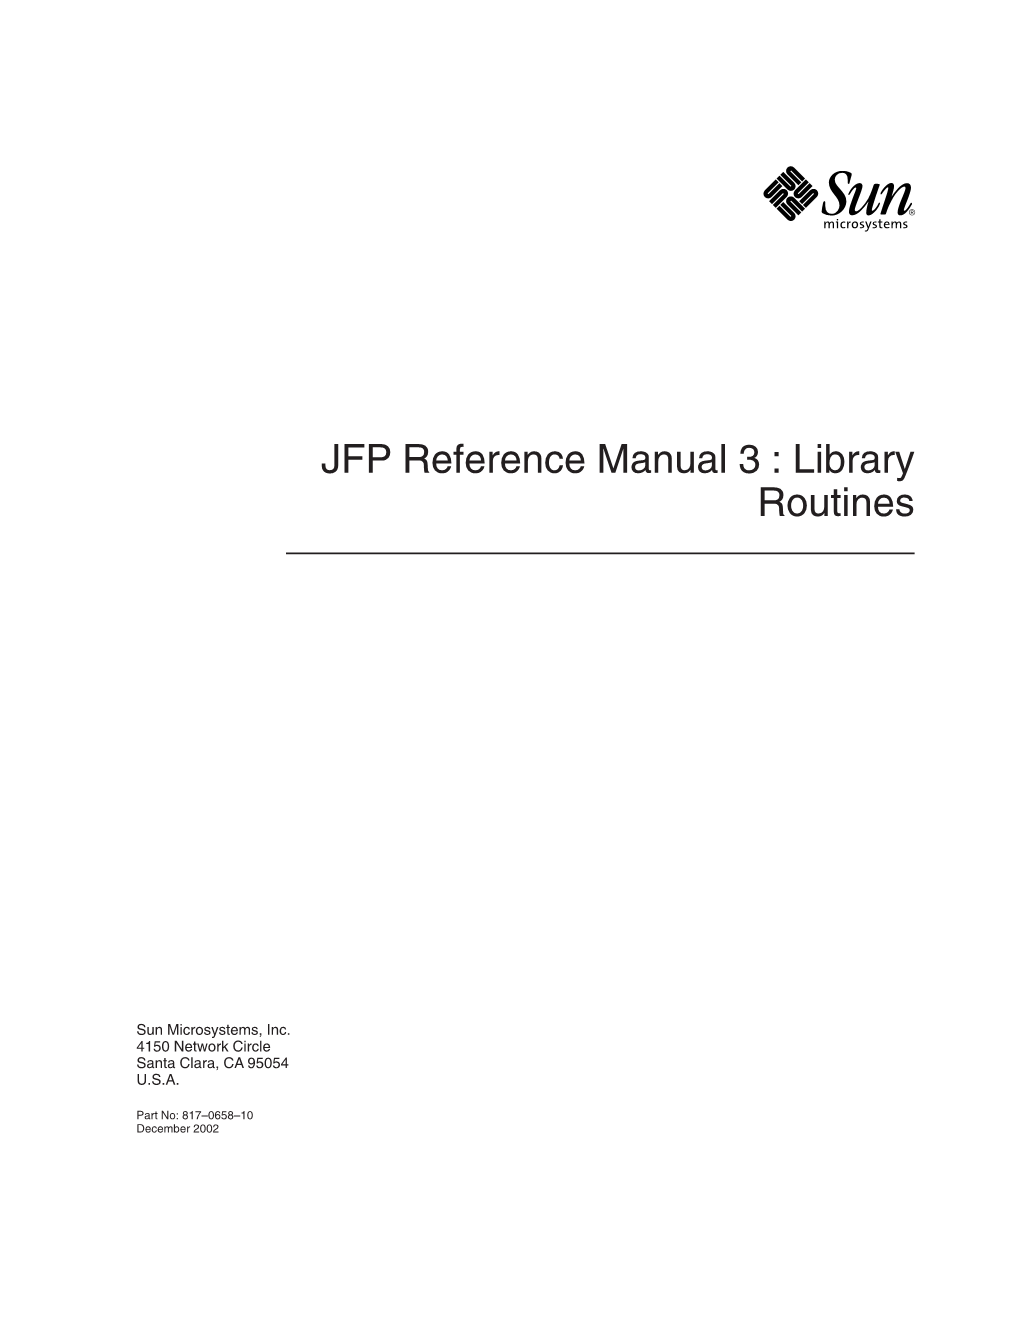 JFP Reference Manual 3 : Library Routines